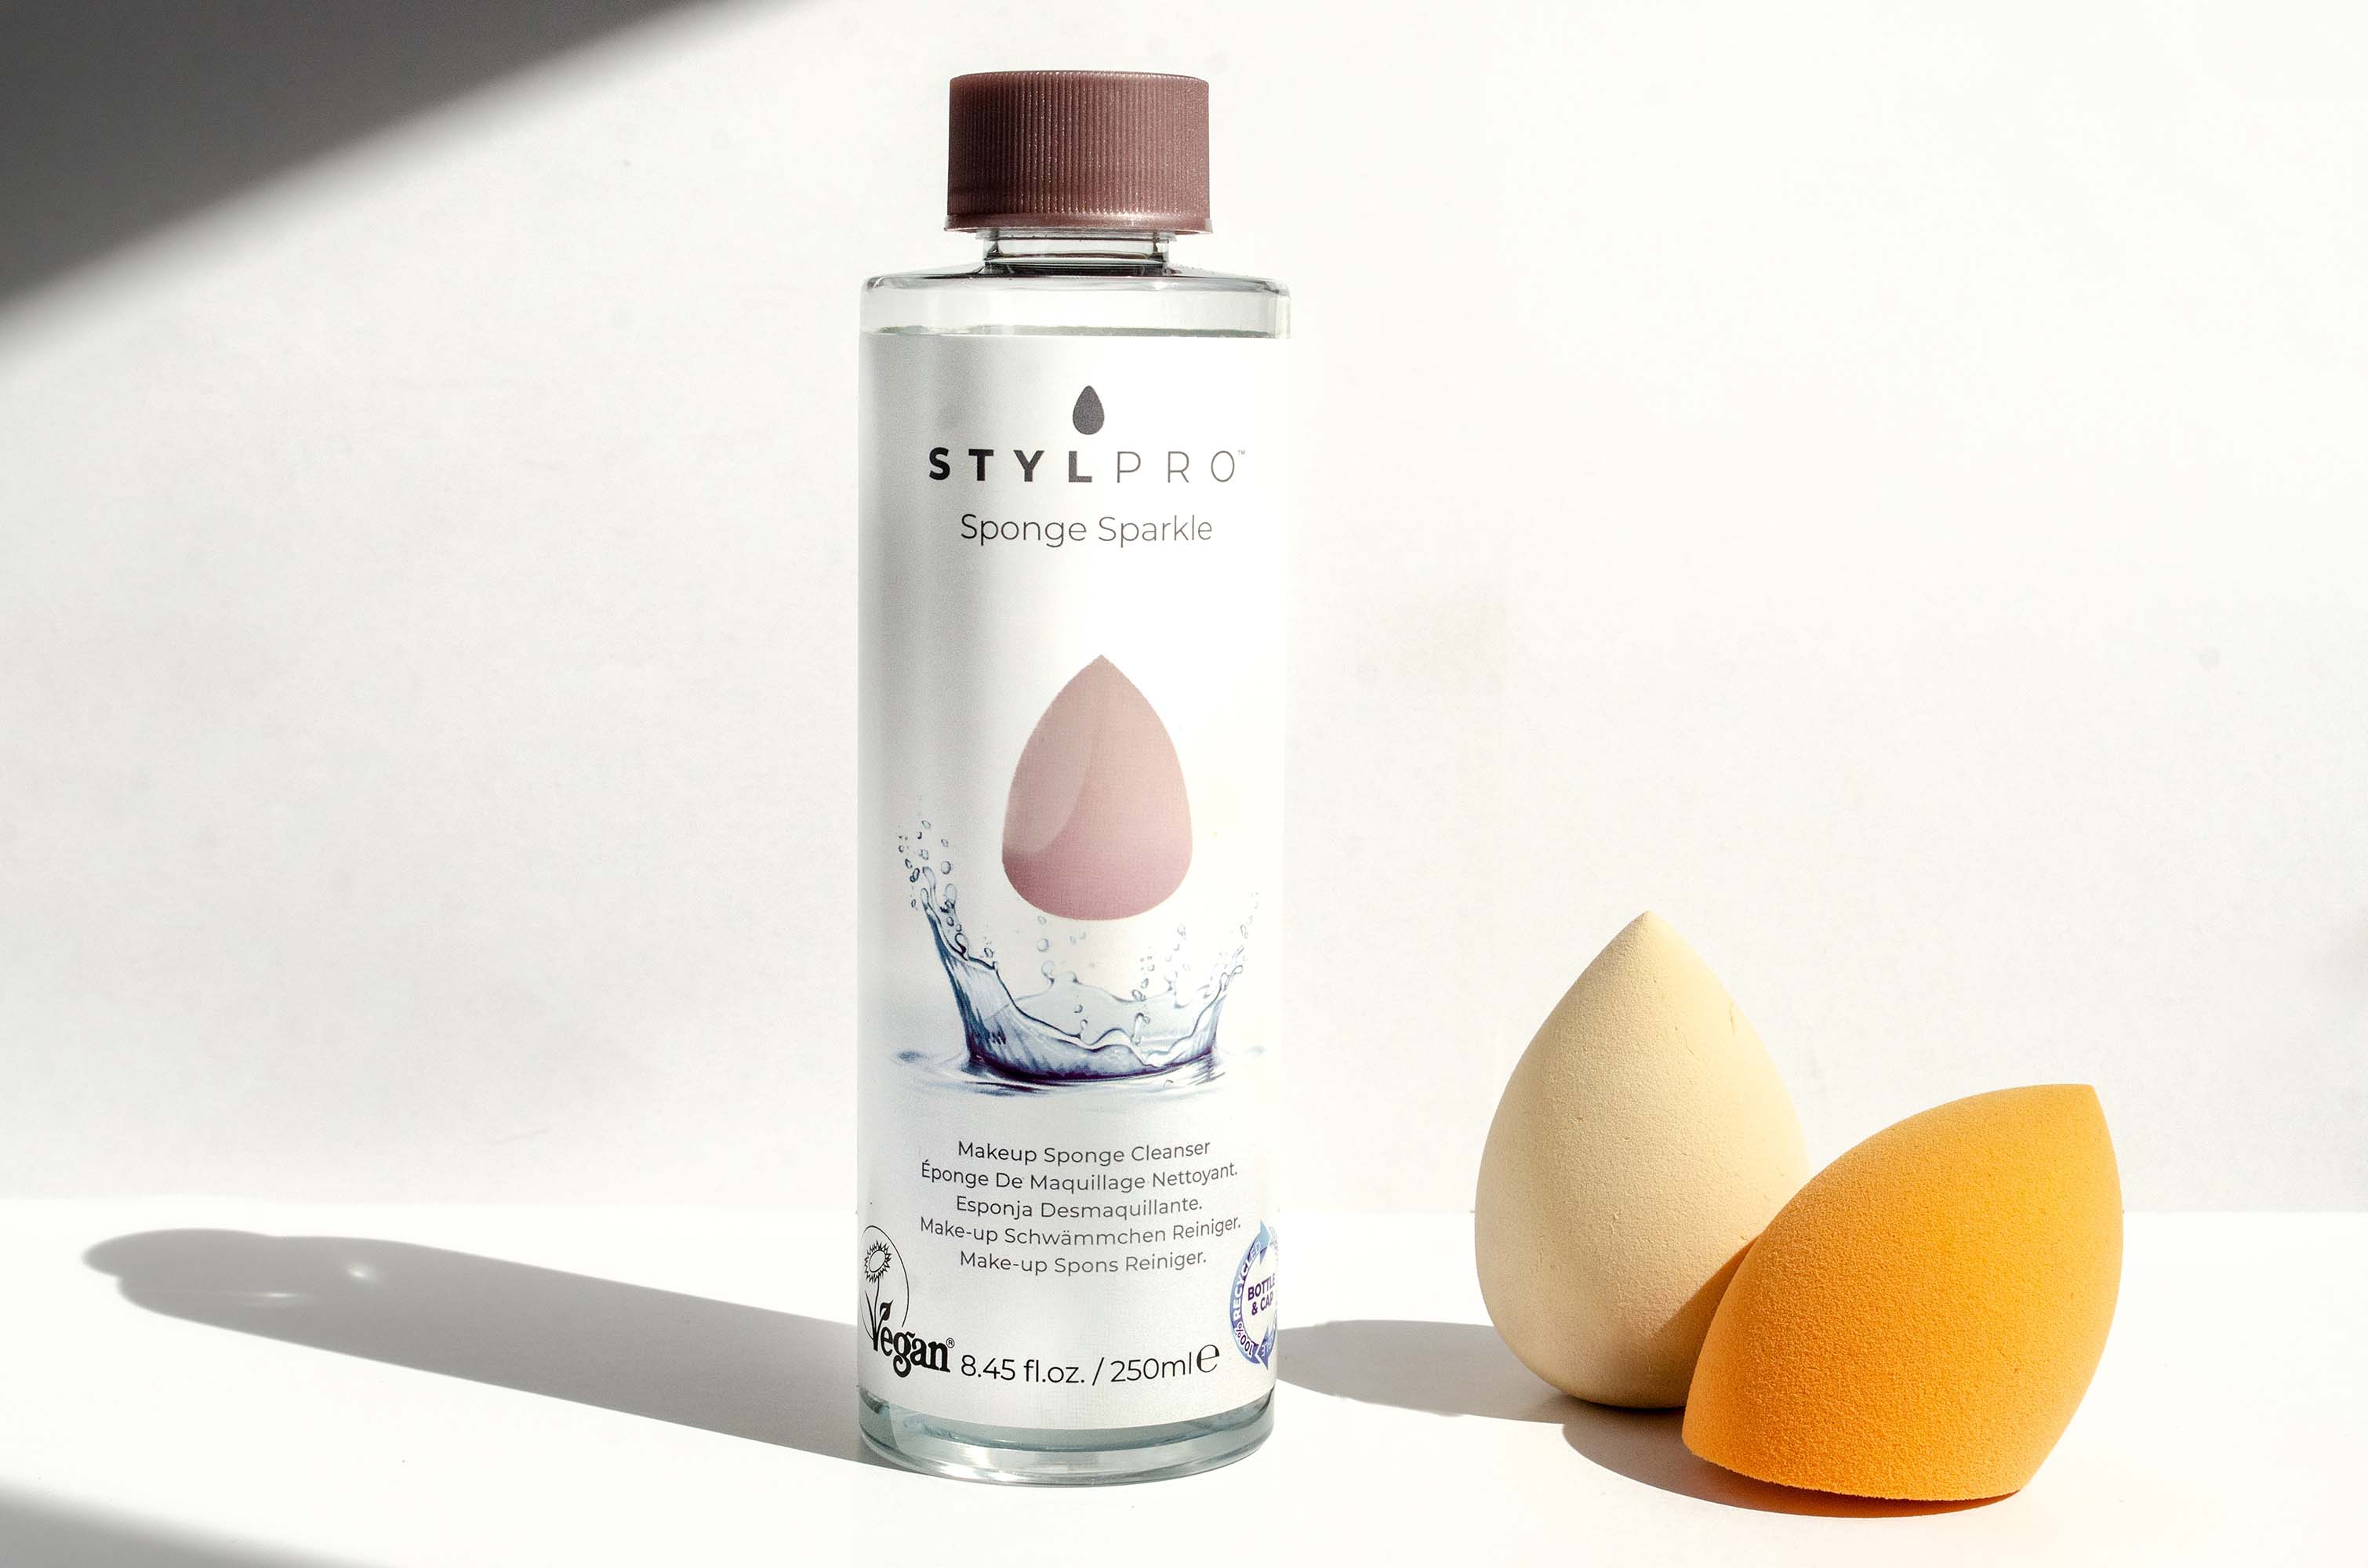 STYLPRO Spin And Squeeze 2-In-1 Makeup Brush & Sponge Cleaner